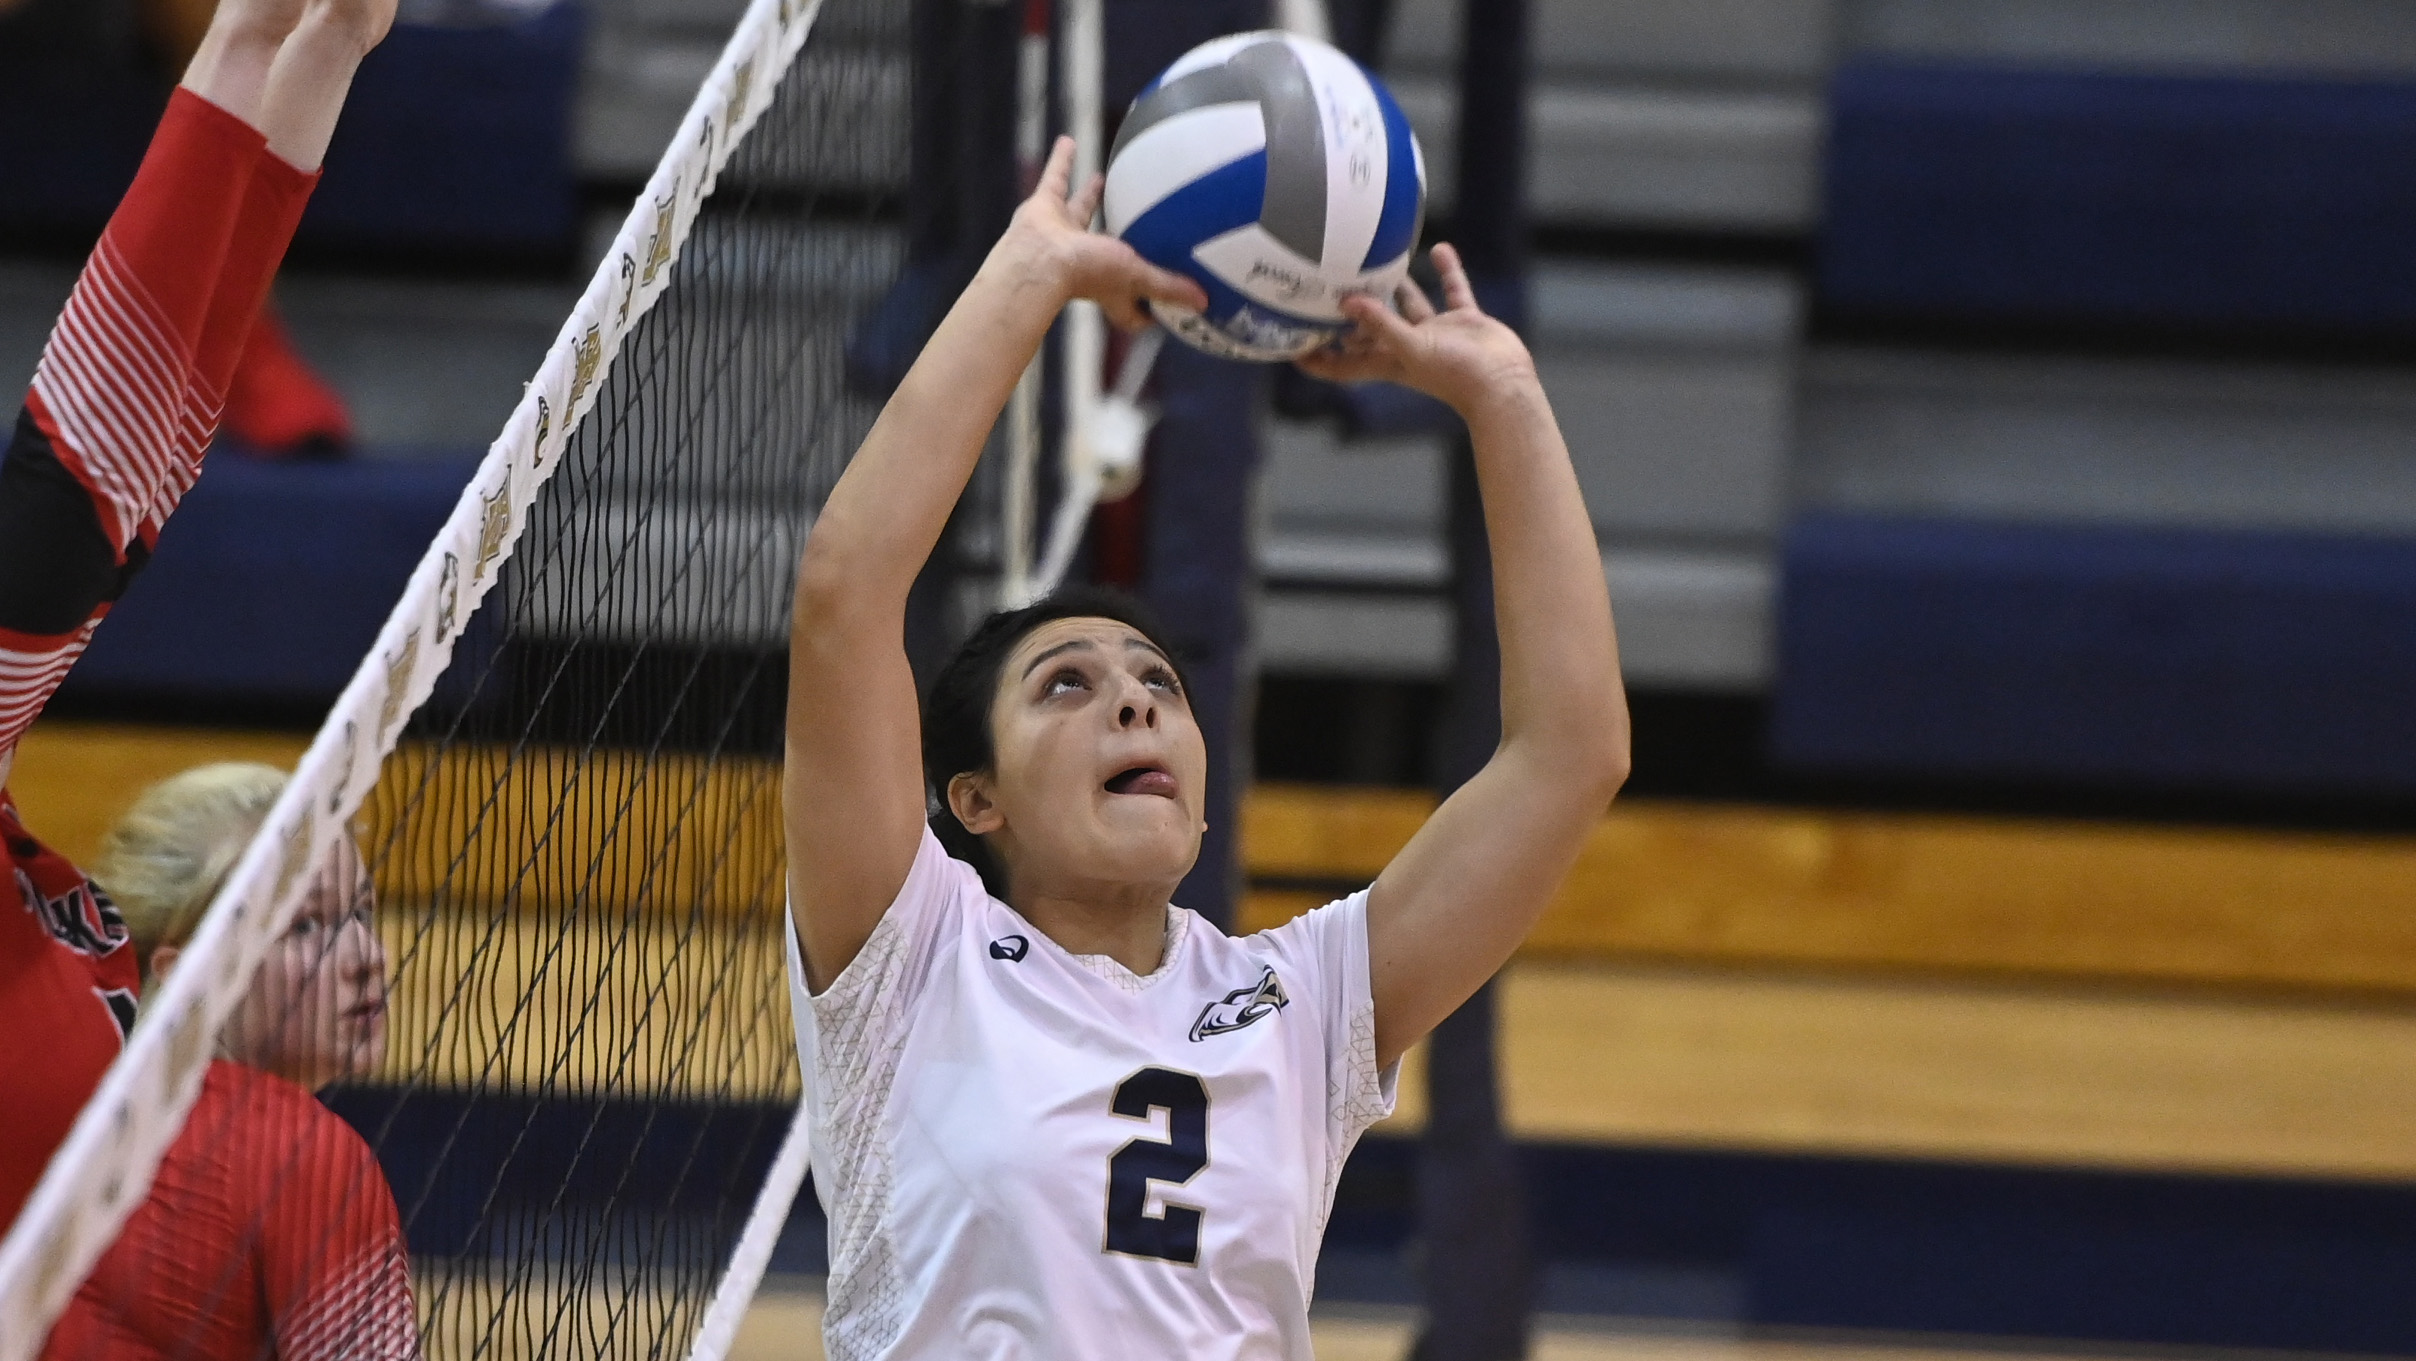 Eagles Nab Pair of Conference Wins as they Sweep Susquehanna & Drew